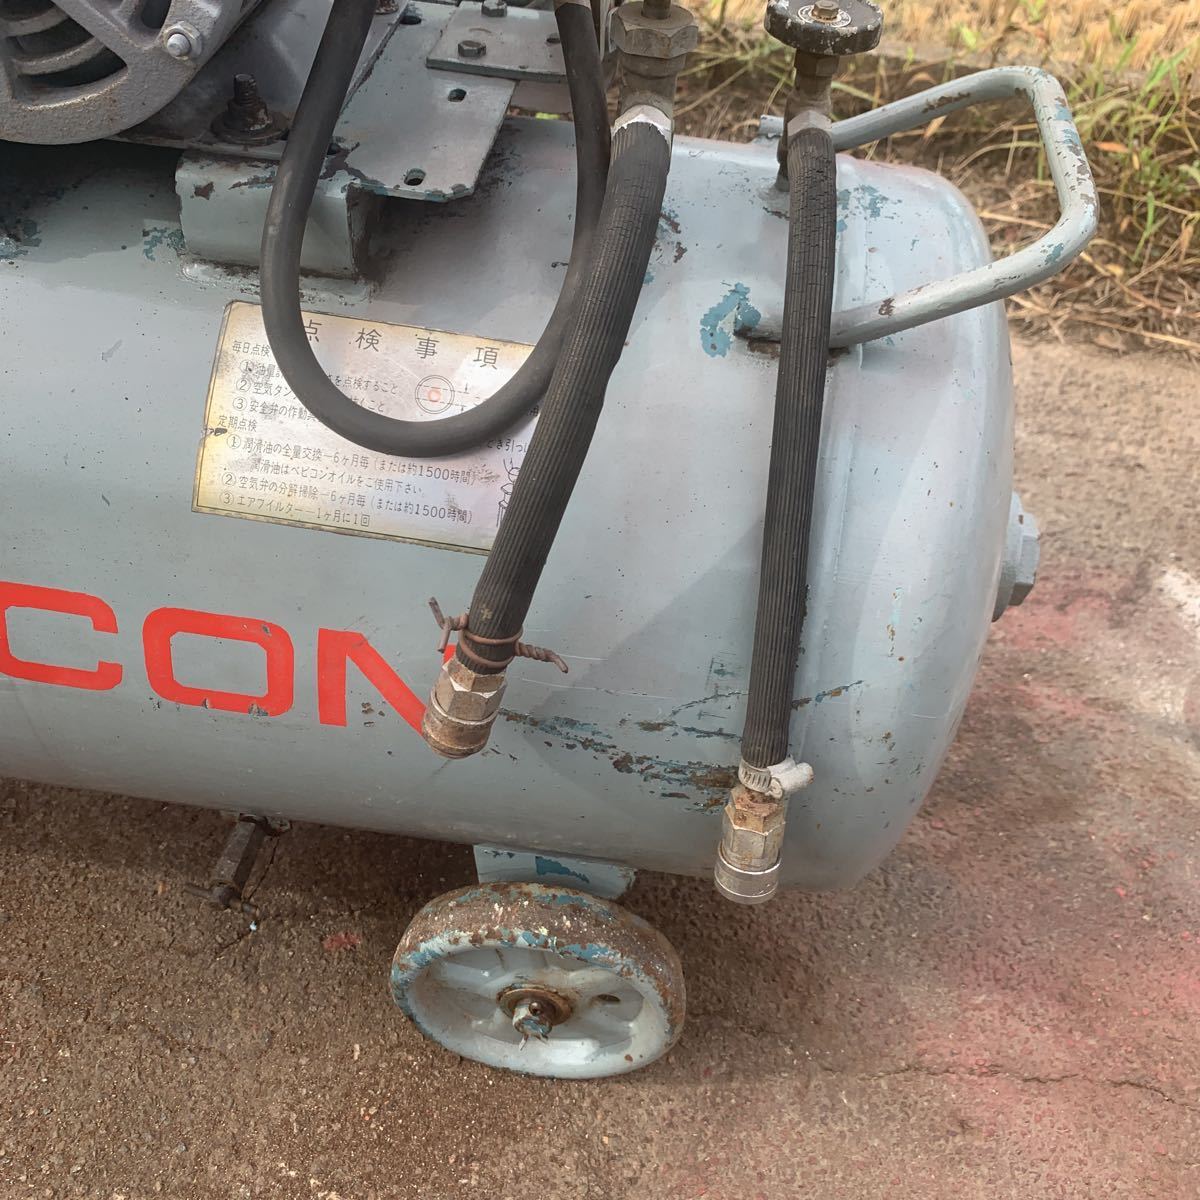 [ Ishikawa ] Hitachi be Vicon be Vicon air compressor pattern number unknown [ electrification. verification ][ receipt possibility ]